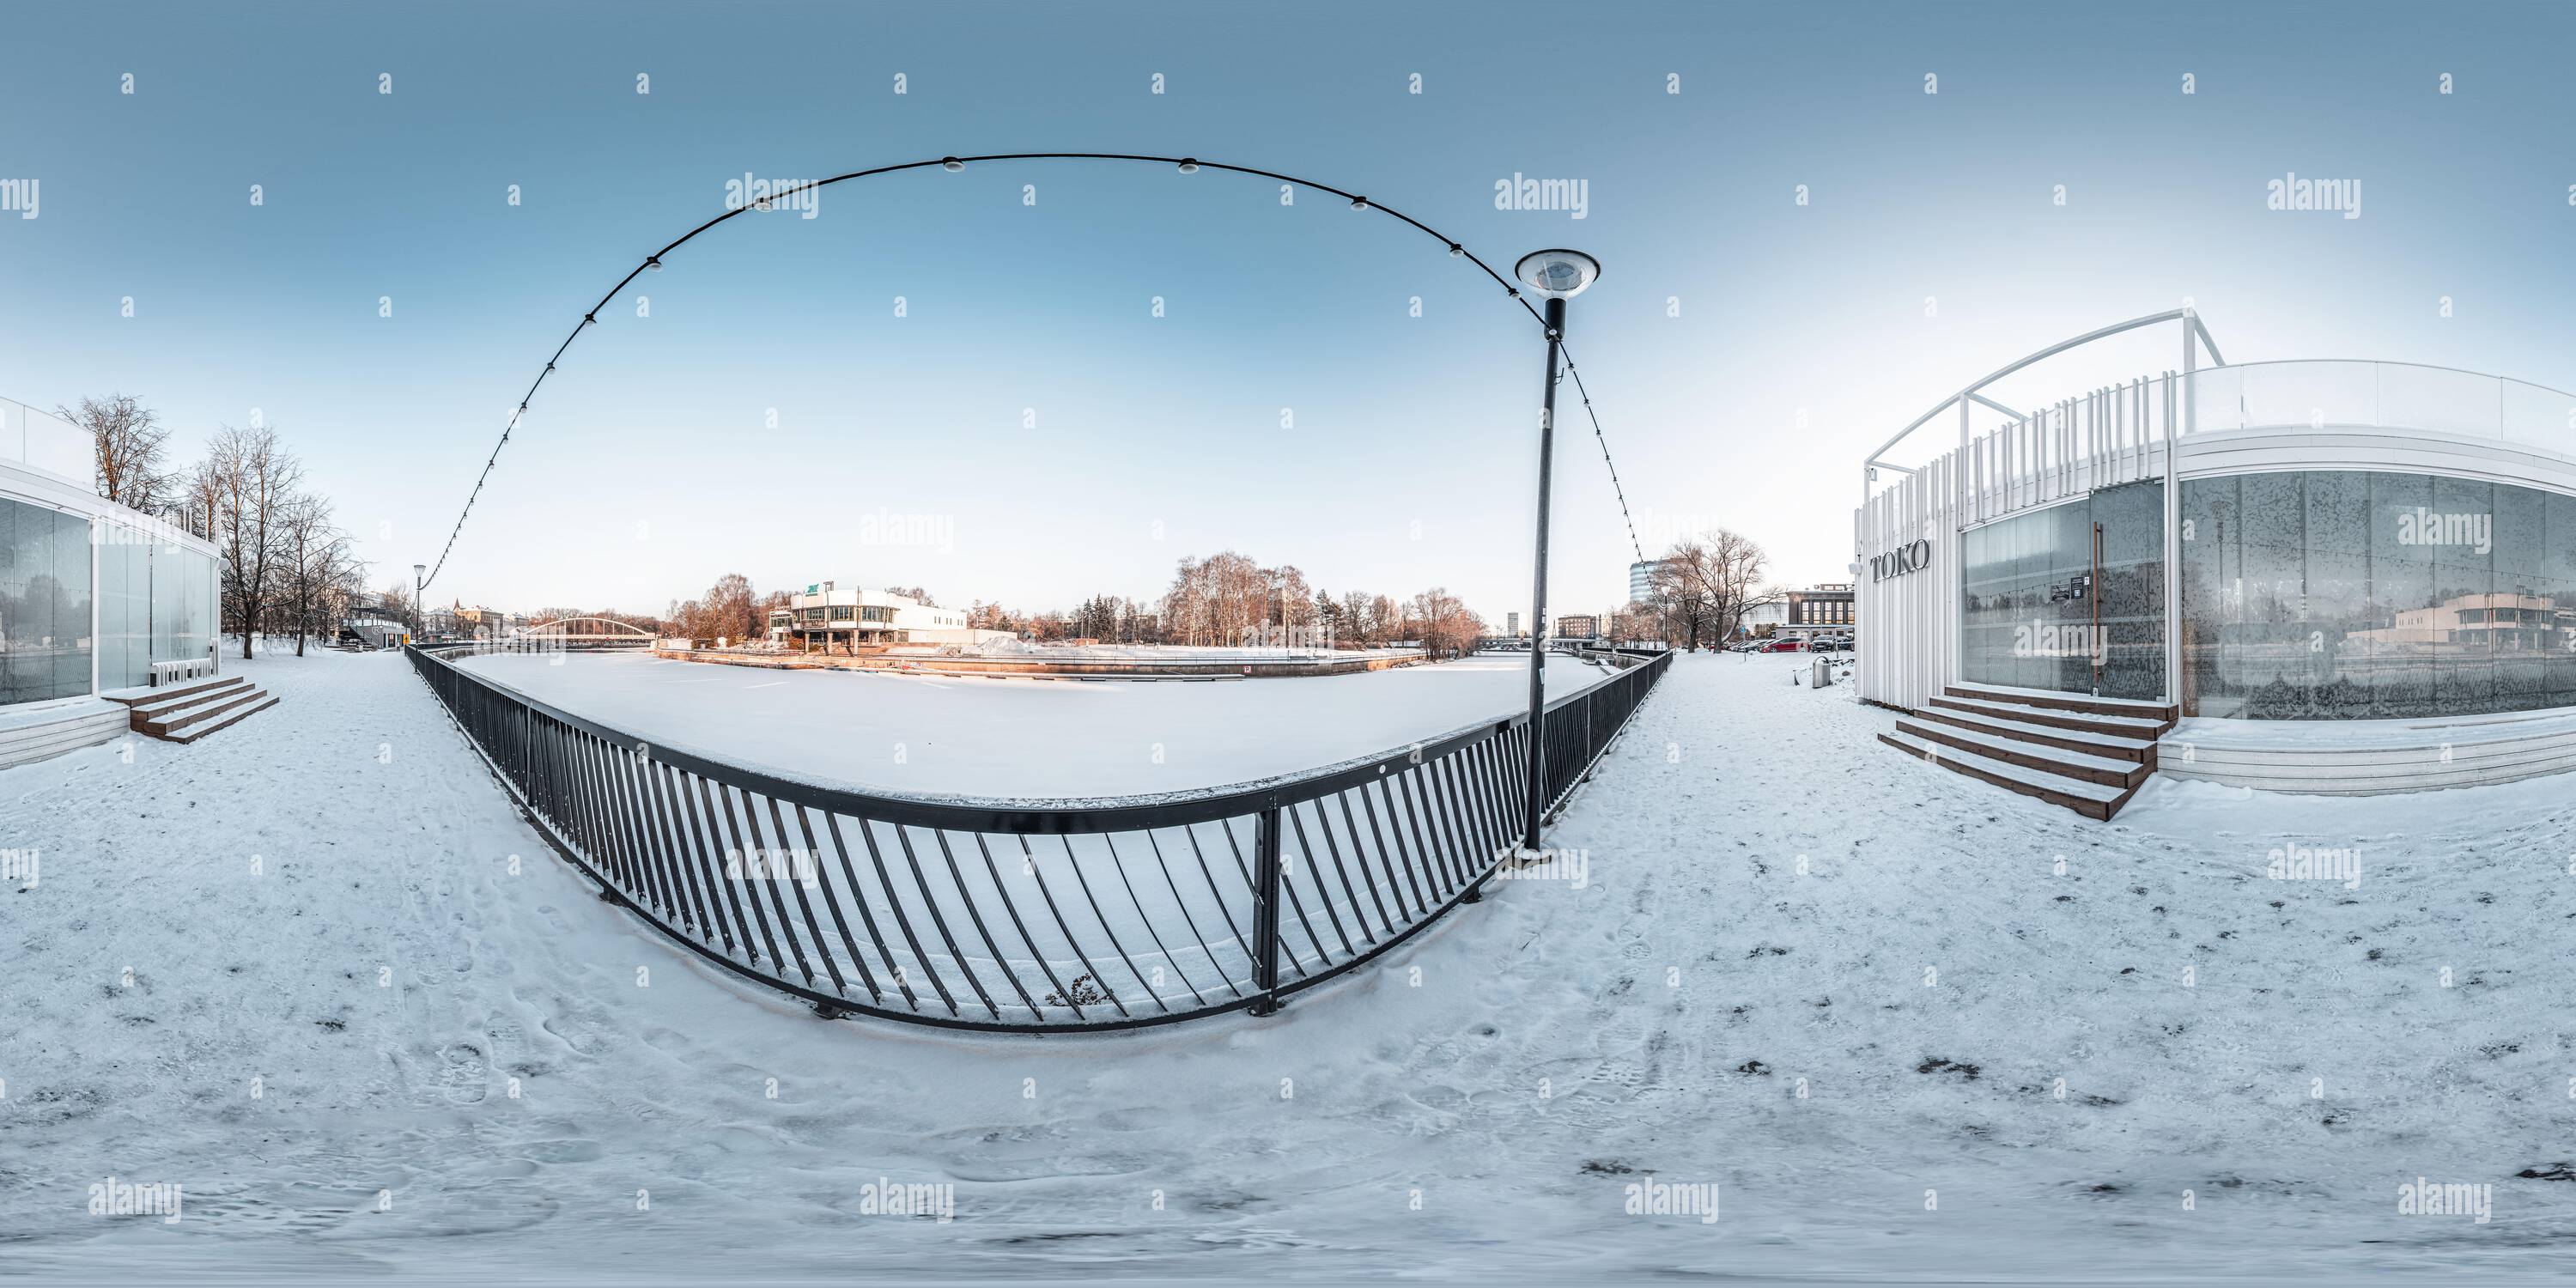 360 degree panoramic view of Winter view next to a frozen river in a small town with lots of snow